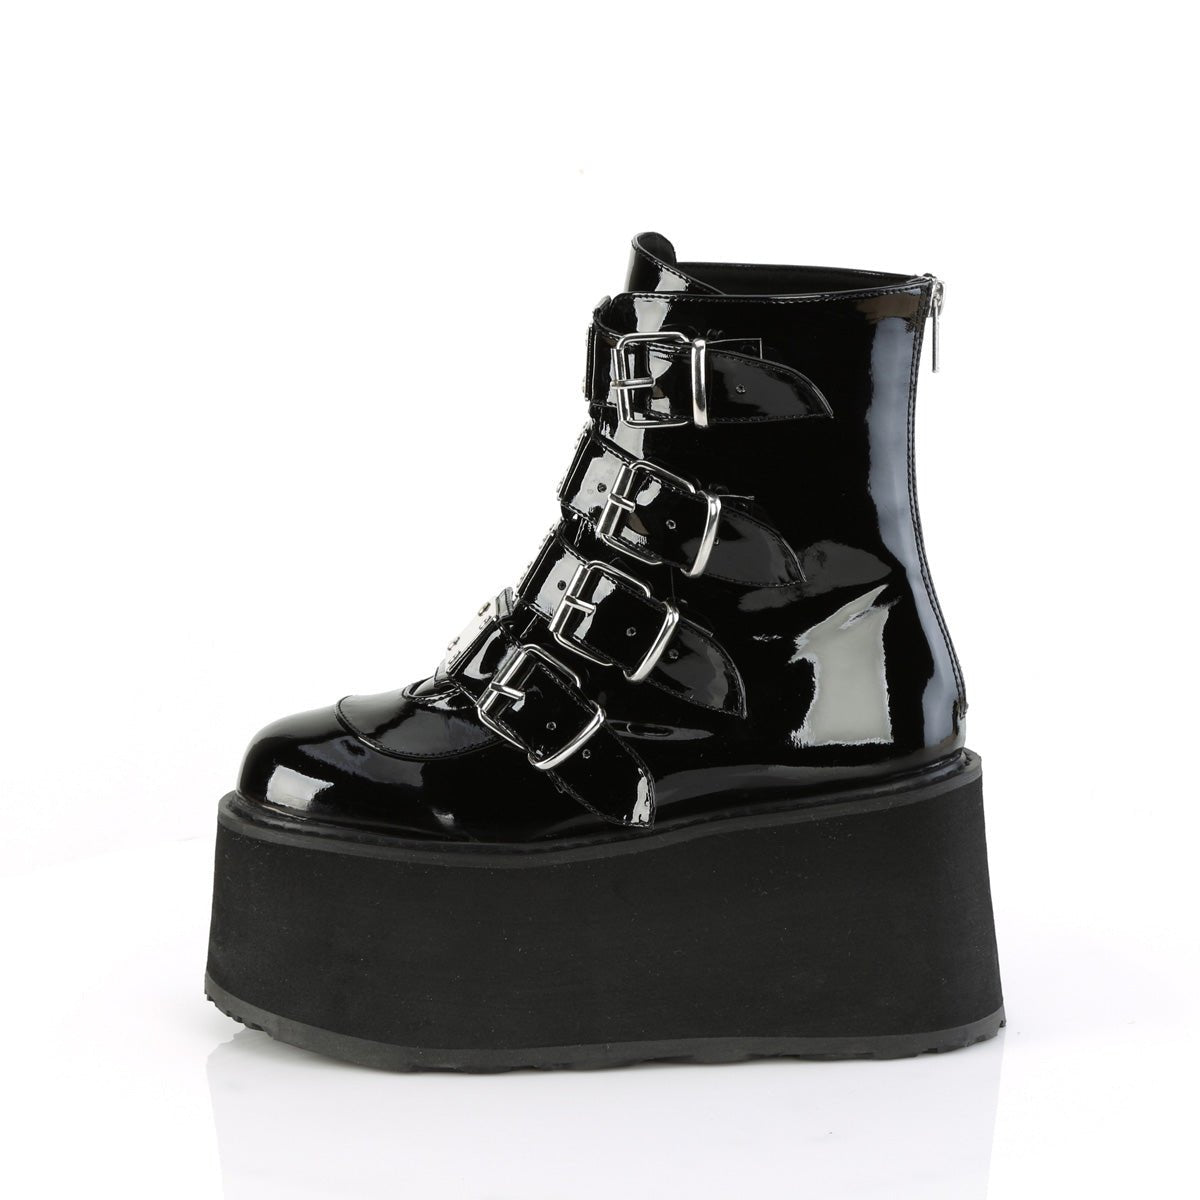 Too Fast | Demonia Damned 105 | Black Patent Leather Women's Ankle Boots